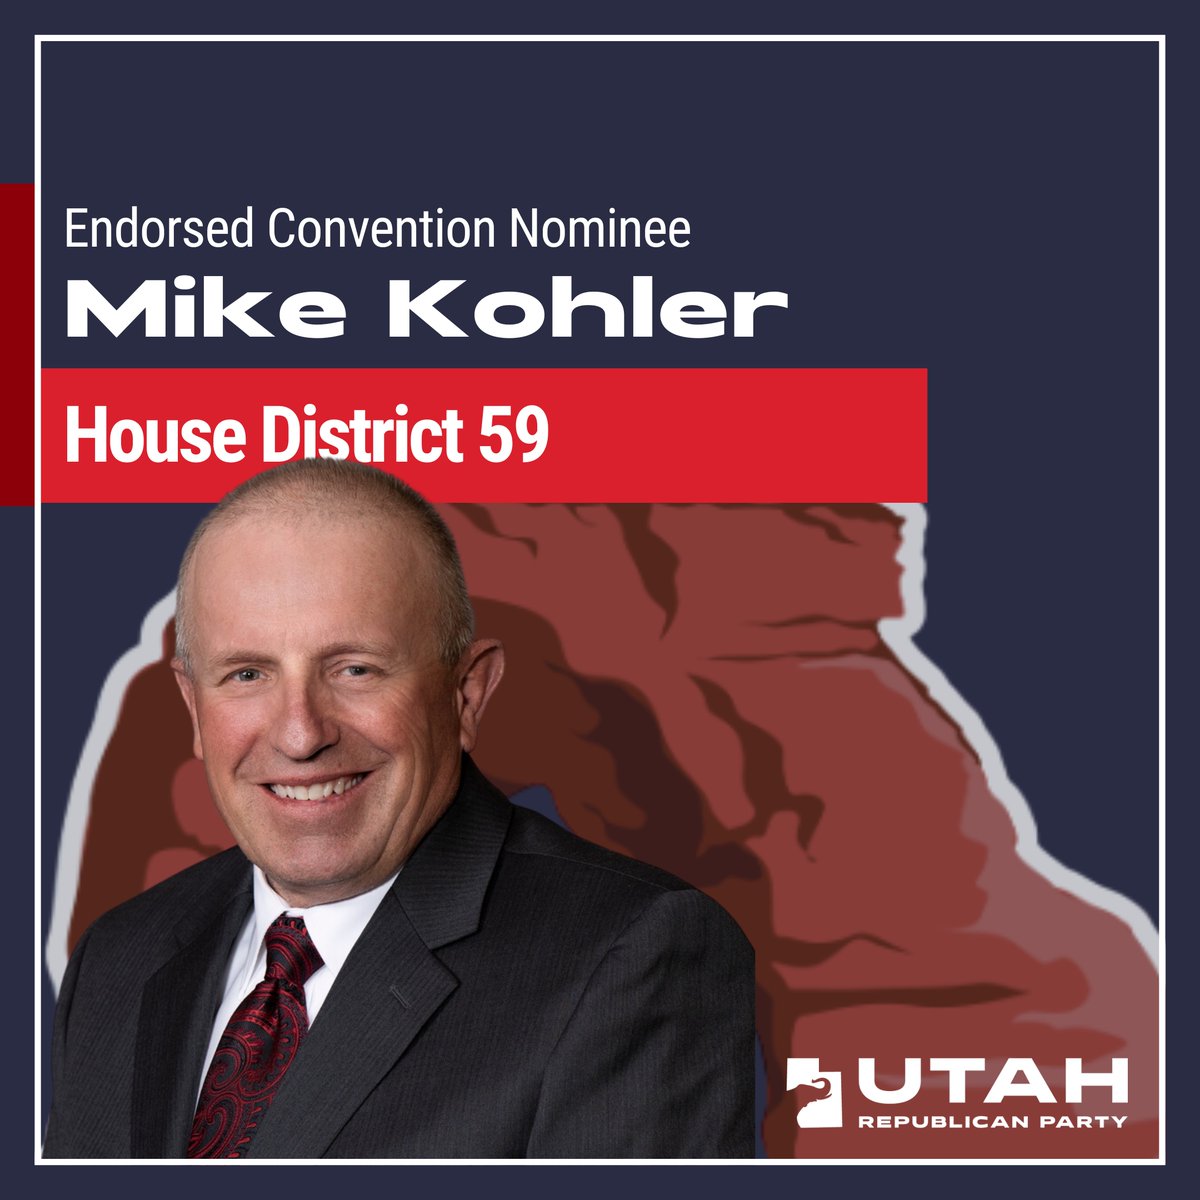 Mike Kohler is the UT GOP's Endorsed Convention Nominee for House District 59! Congratulations Mike!